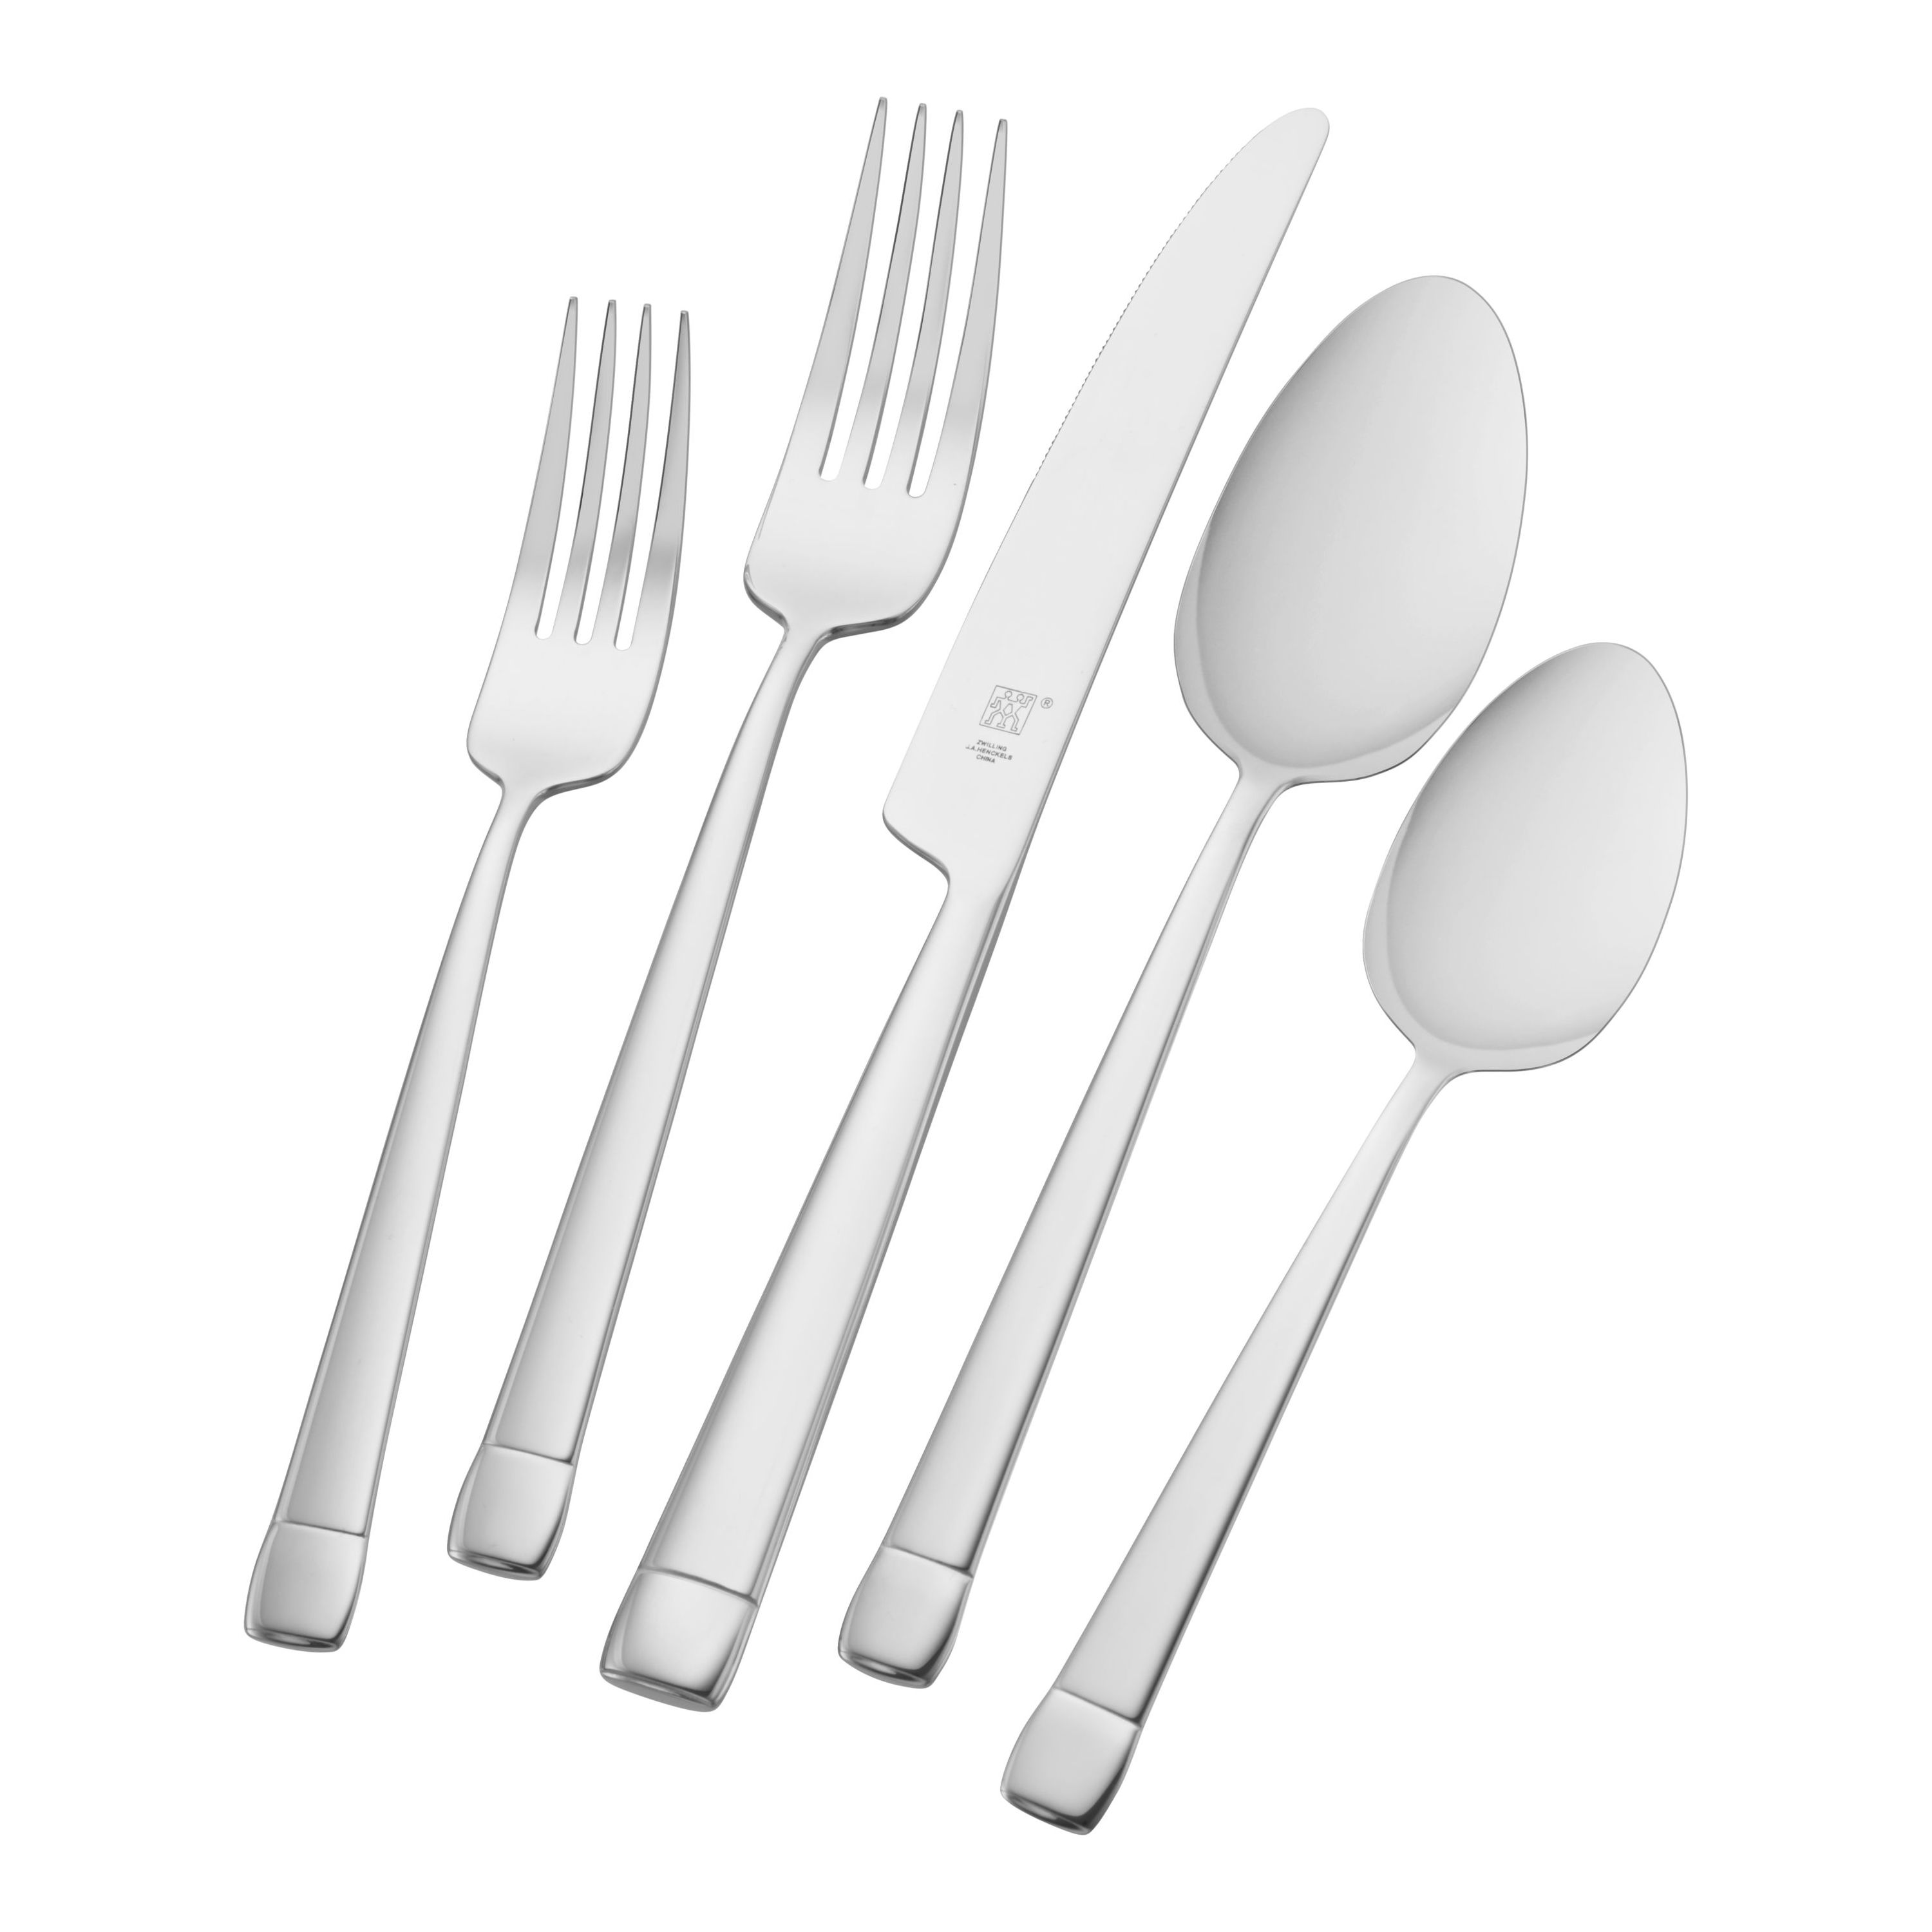 beautiful flatware set 18/10 stainless steel service for 4 very rich looking 